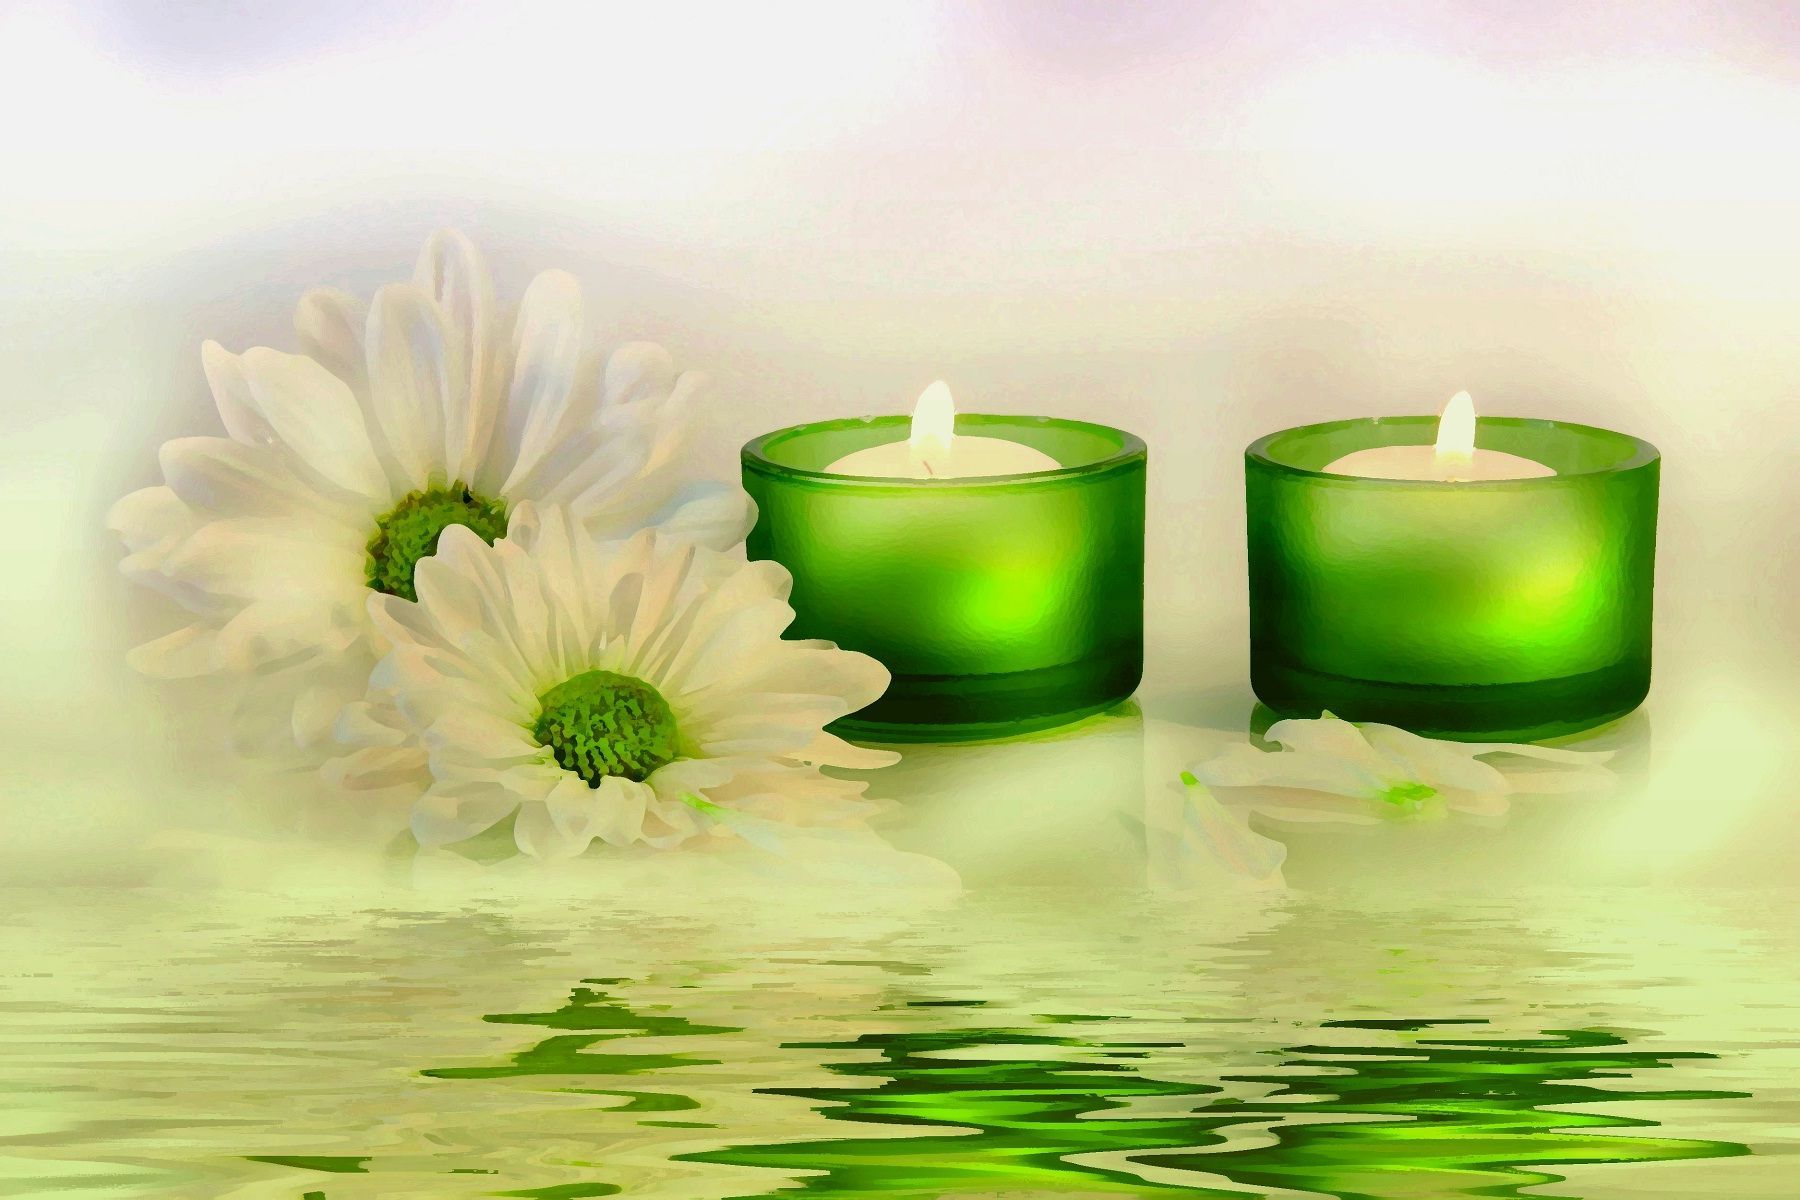 Click Here To Download In HD Format >> Candles Wallpaper 23 Wallpaper Candles Wallp. Candles Wallpaper, Candles, Wallpaper